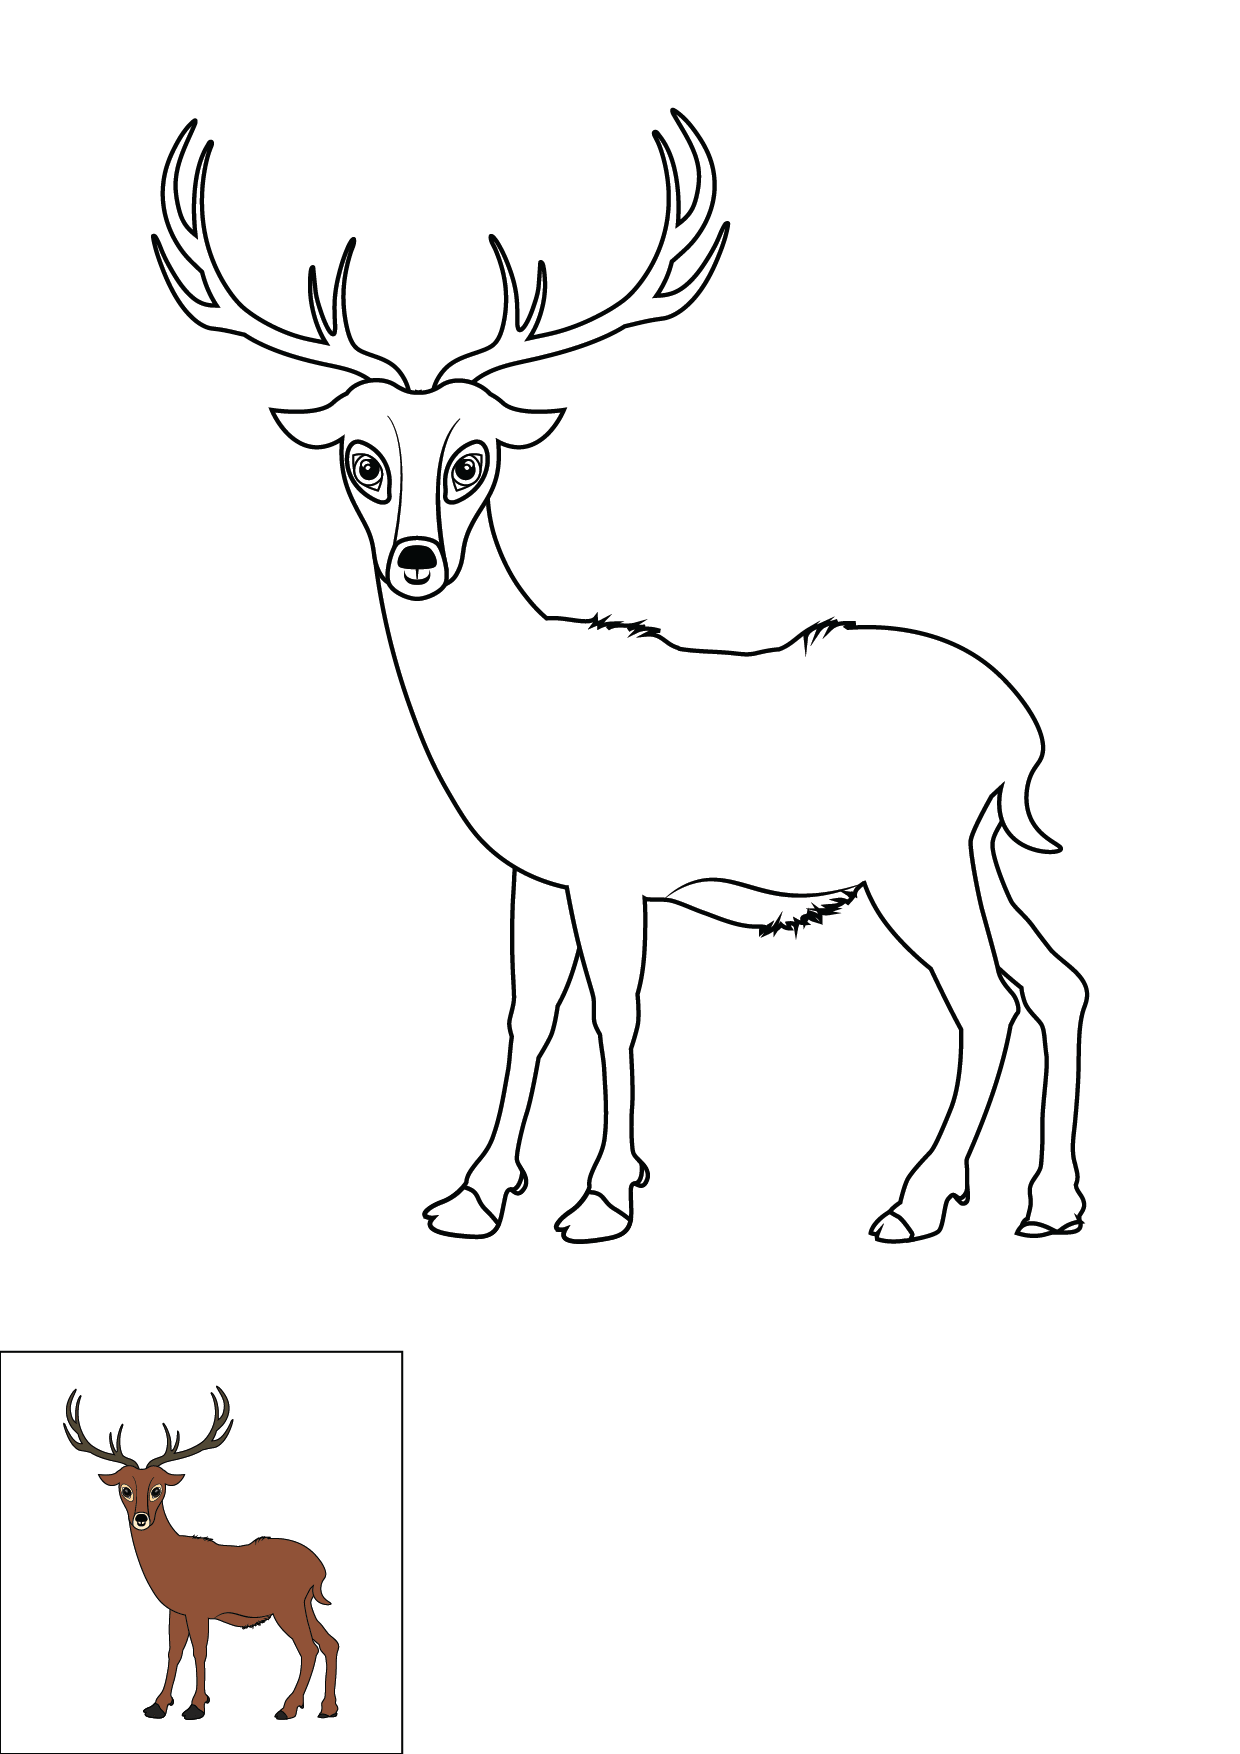 How to Draw A Deer Step by Step Printable Color